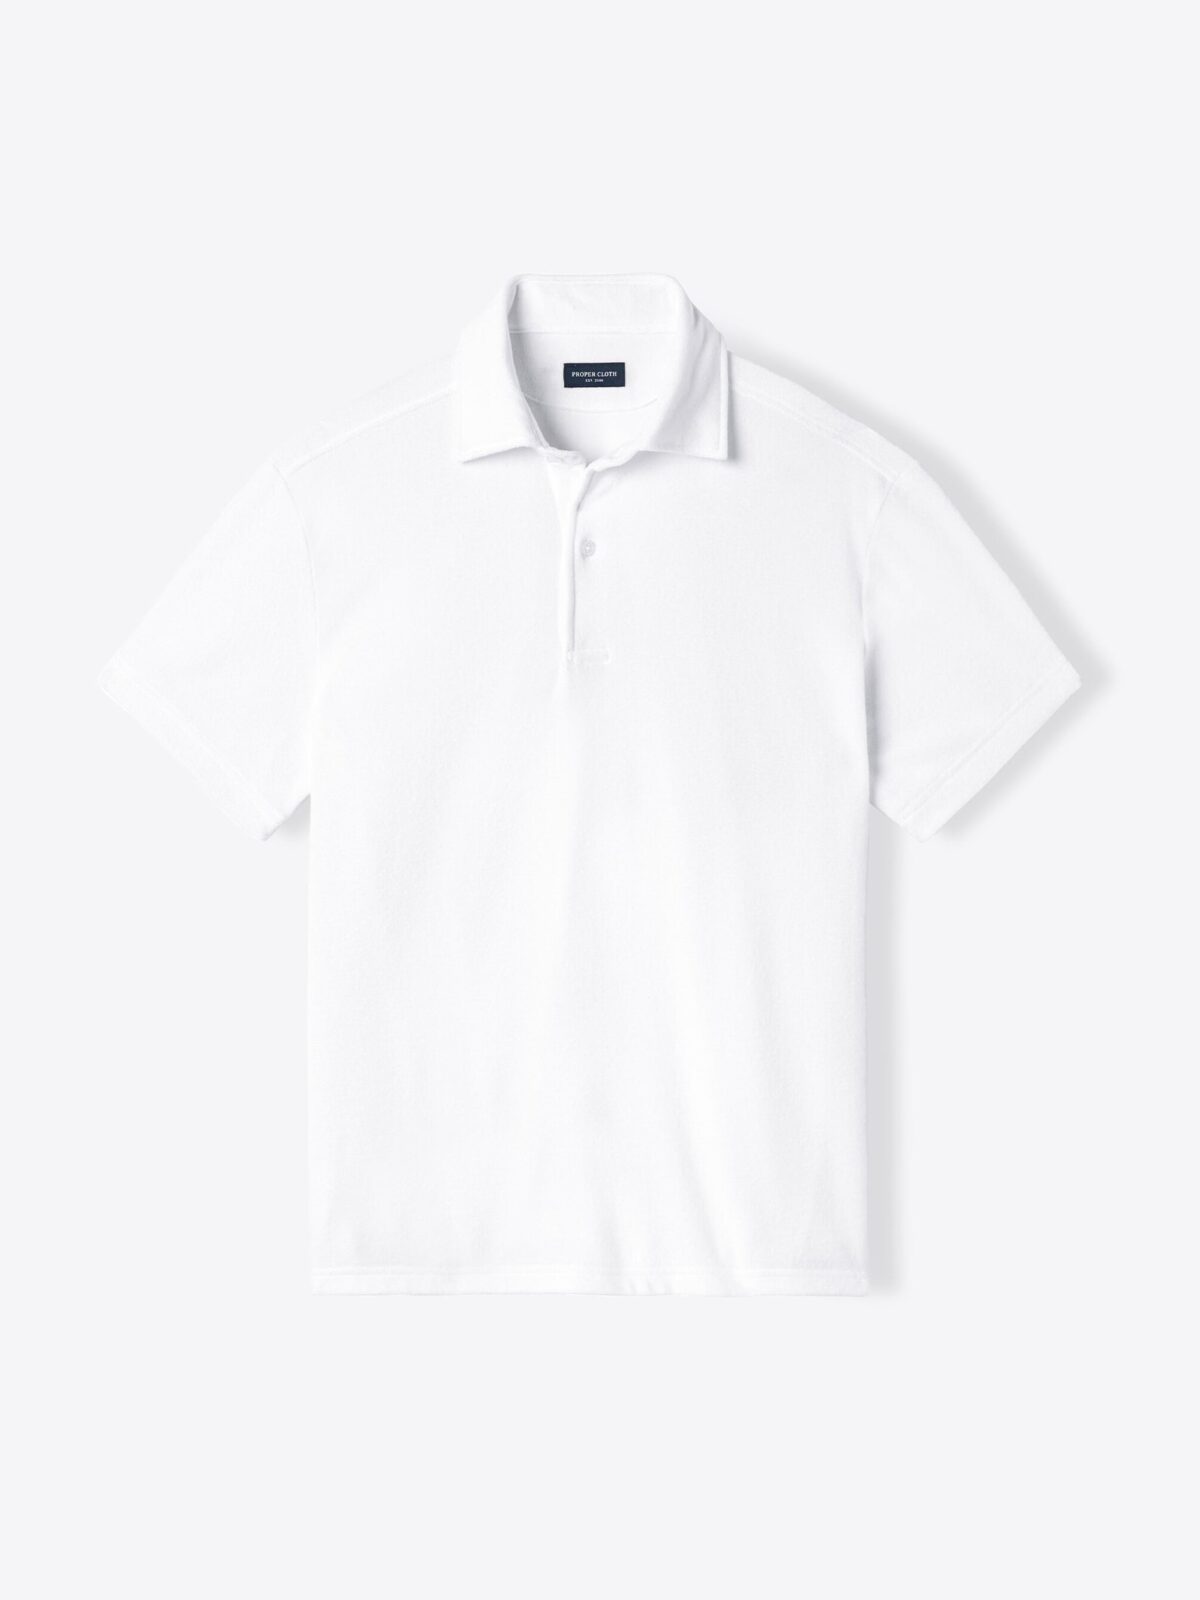 White Terry Cloth Knit Poolside Polo Shirt